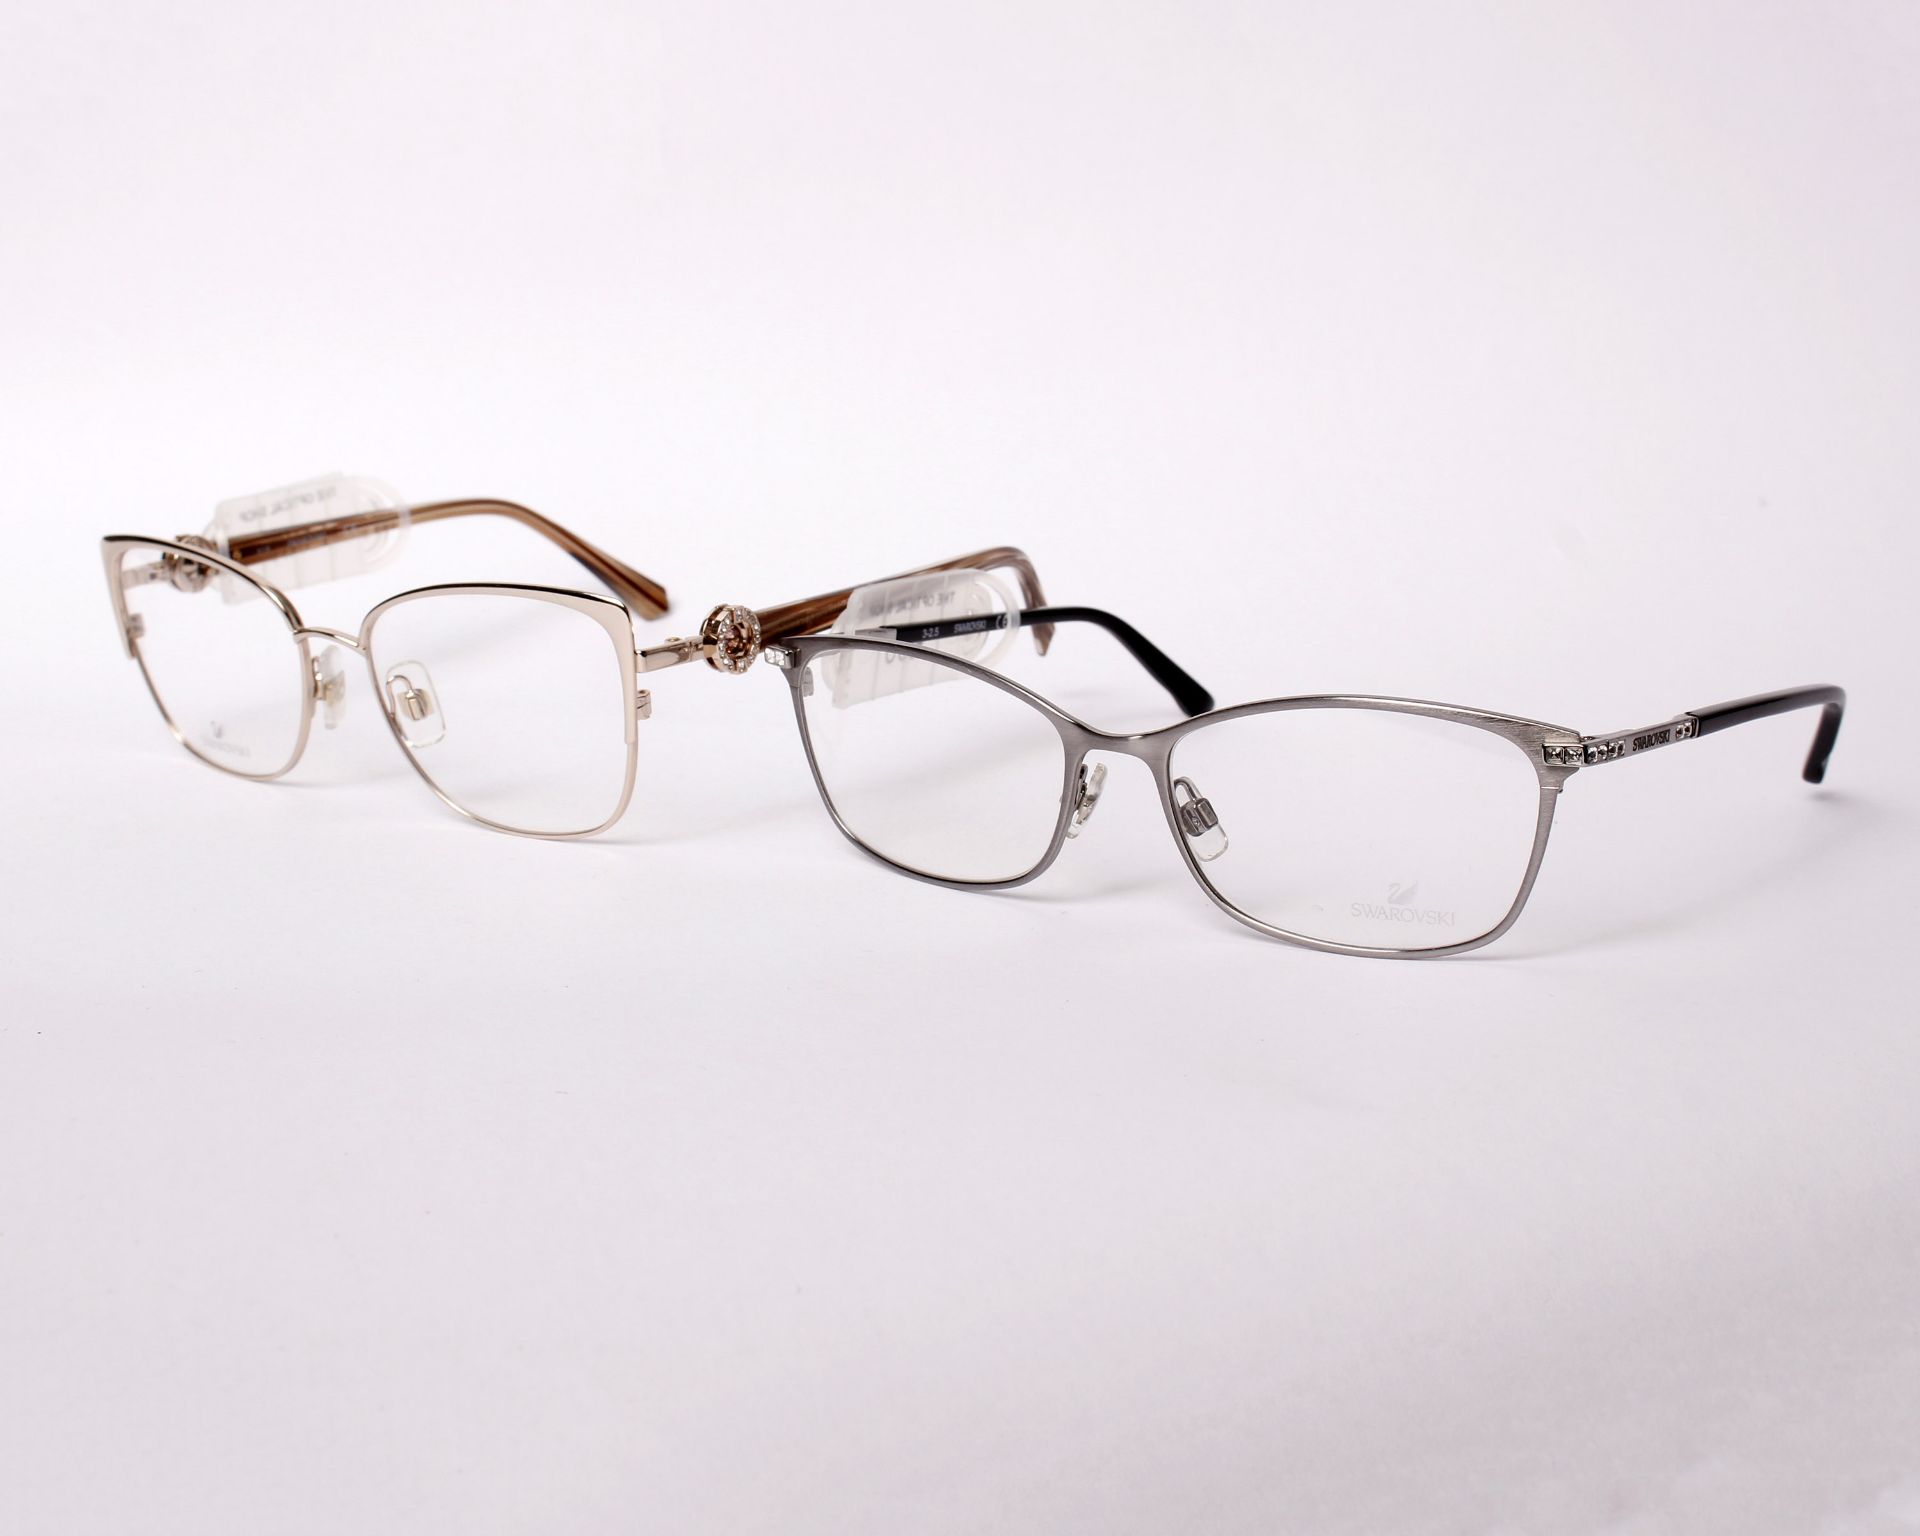 Two pairs of as new Swarovski glasses frames with clear glass (RRP £90 and £120).